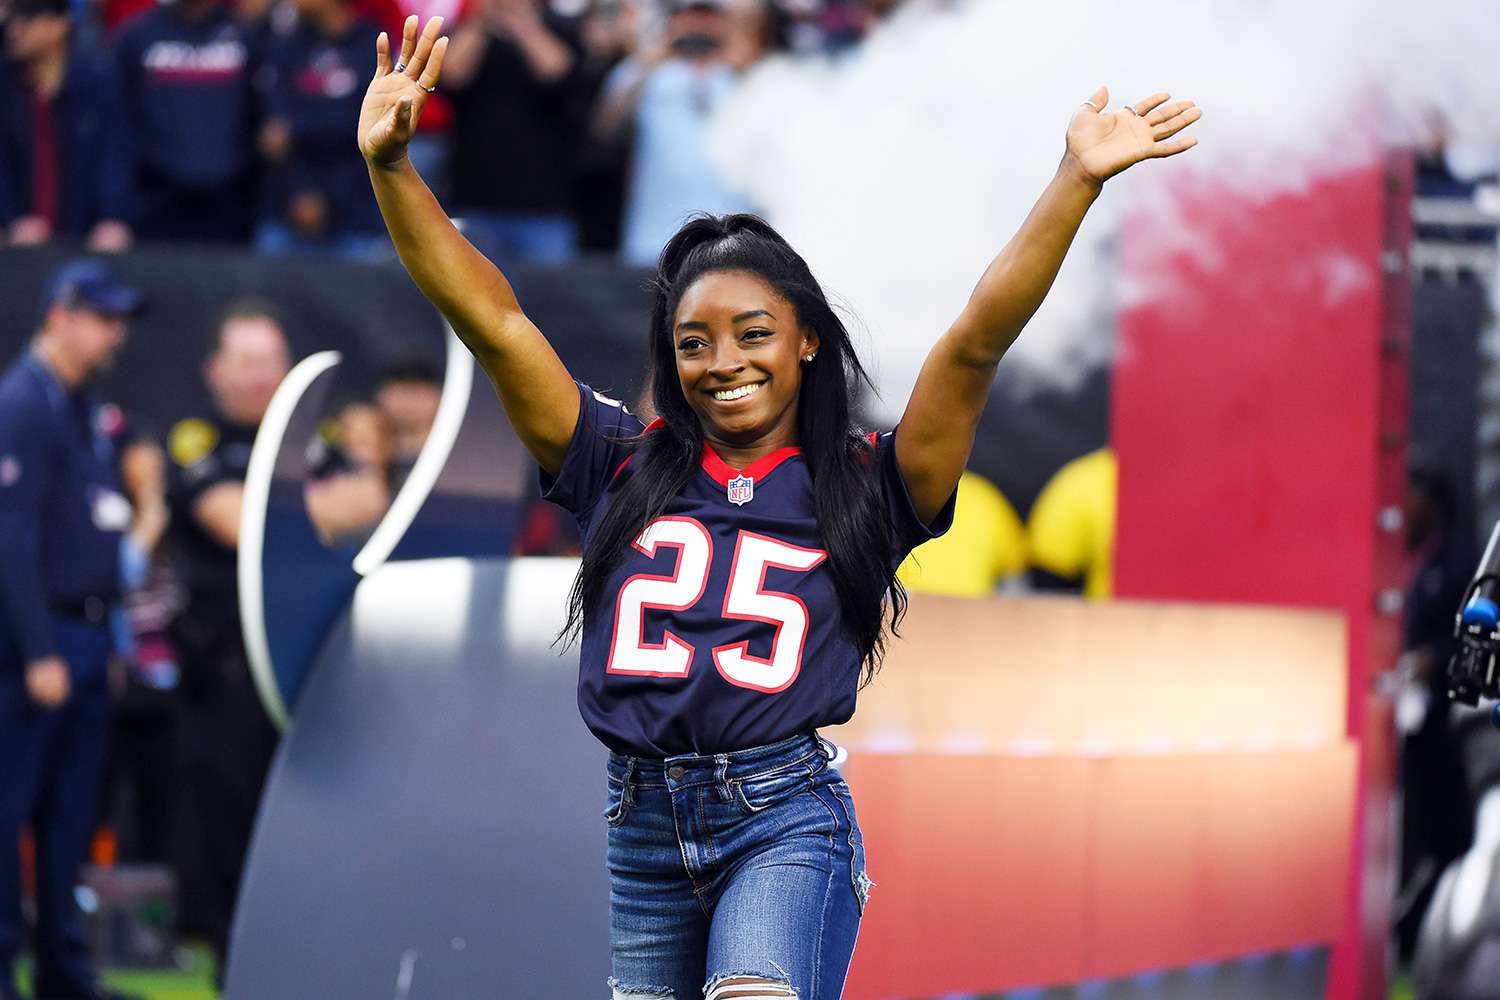 Olympic gymnast Simone Biles leads the Houston Texans out to the field as the homefield advantage captain before an NFL football game against the Tennessee Titans, in Houston